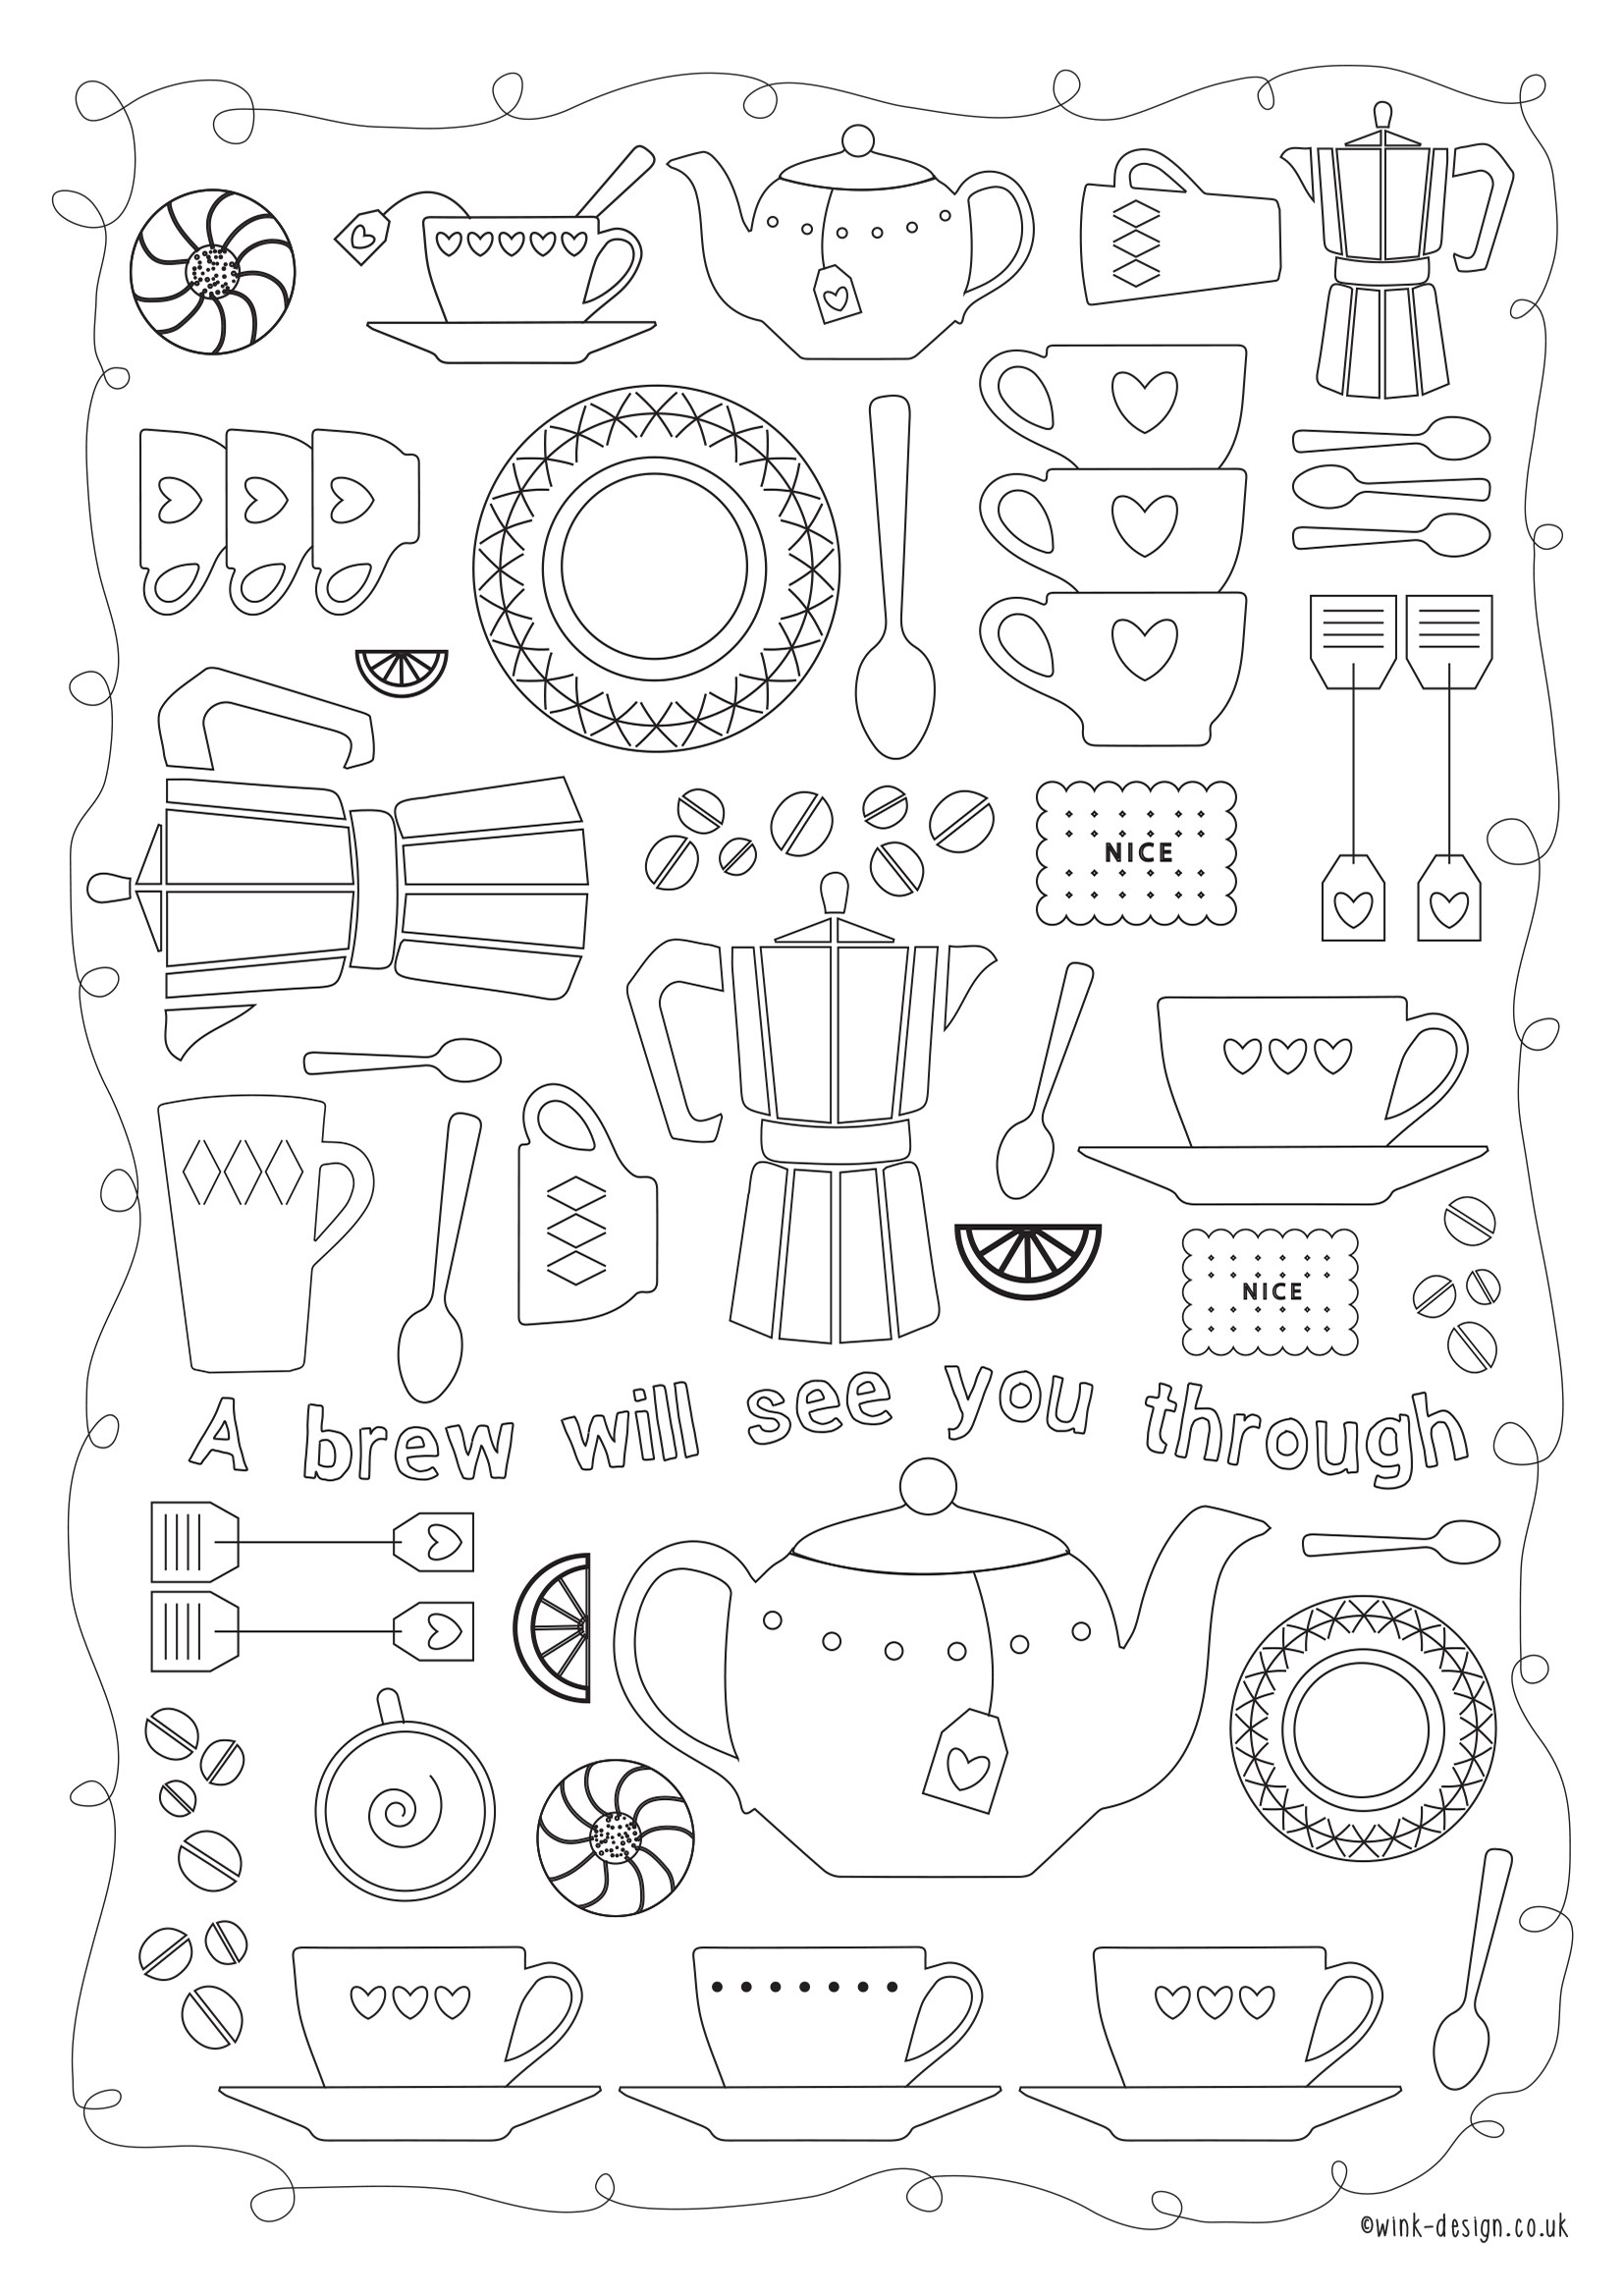 Download Free Printable Adult Colouring Pages - Inspirational ...